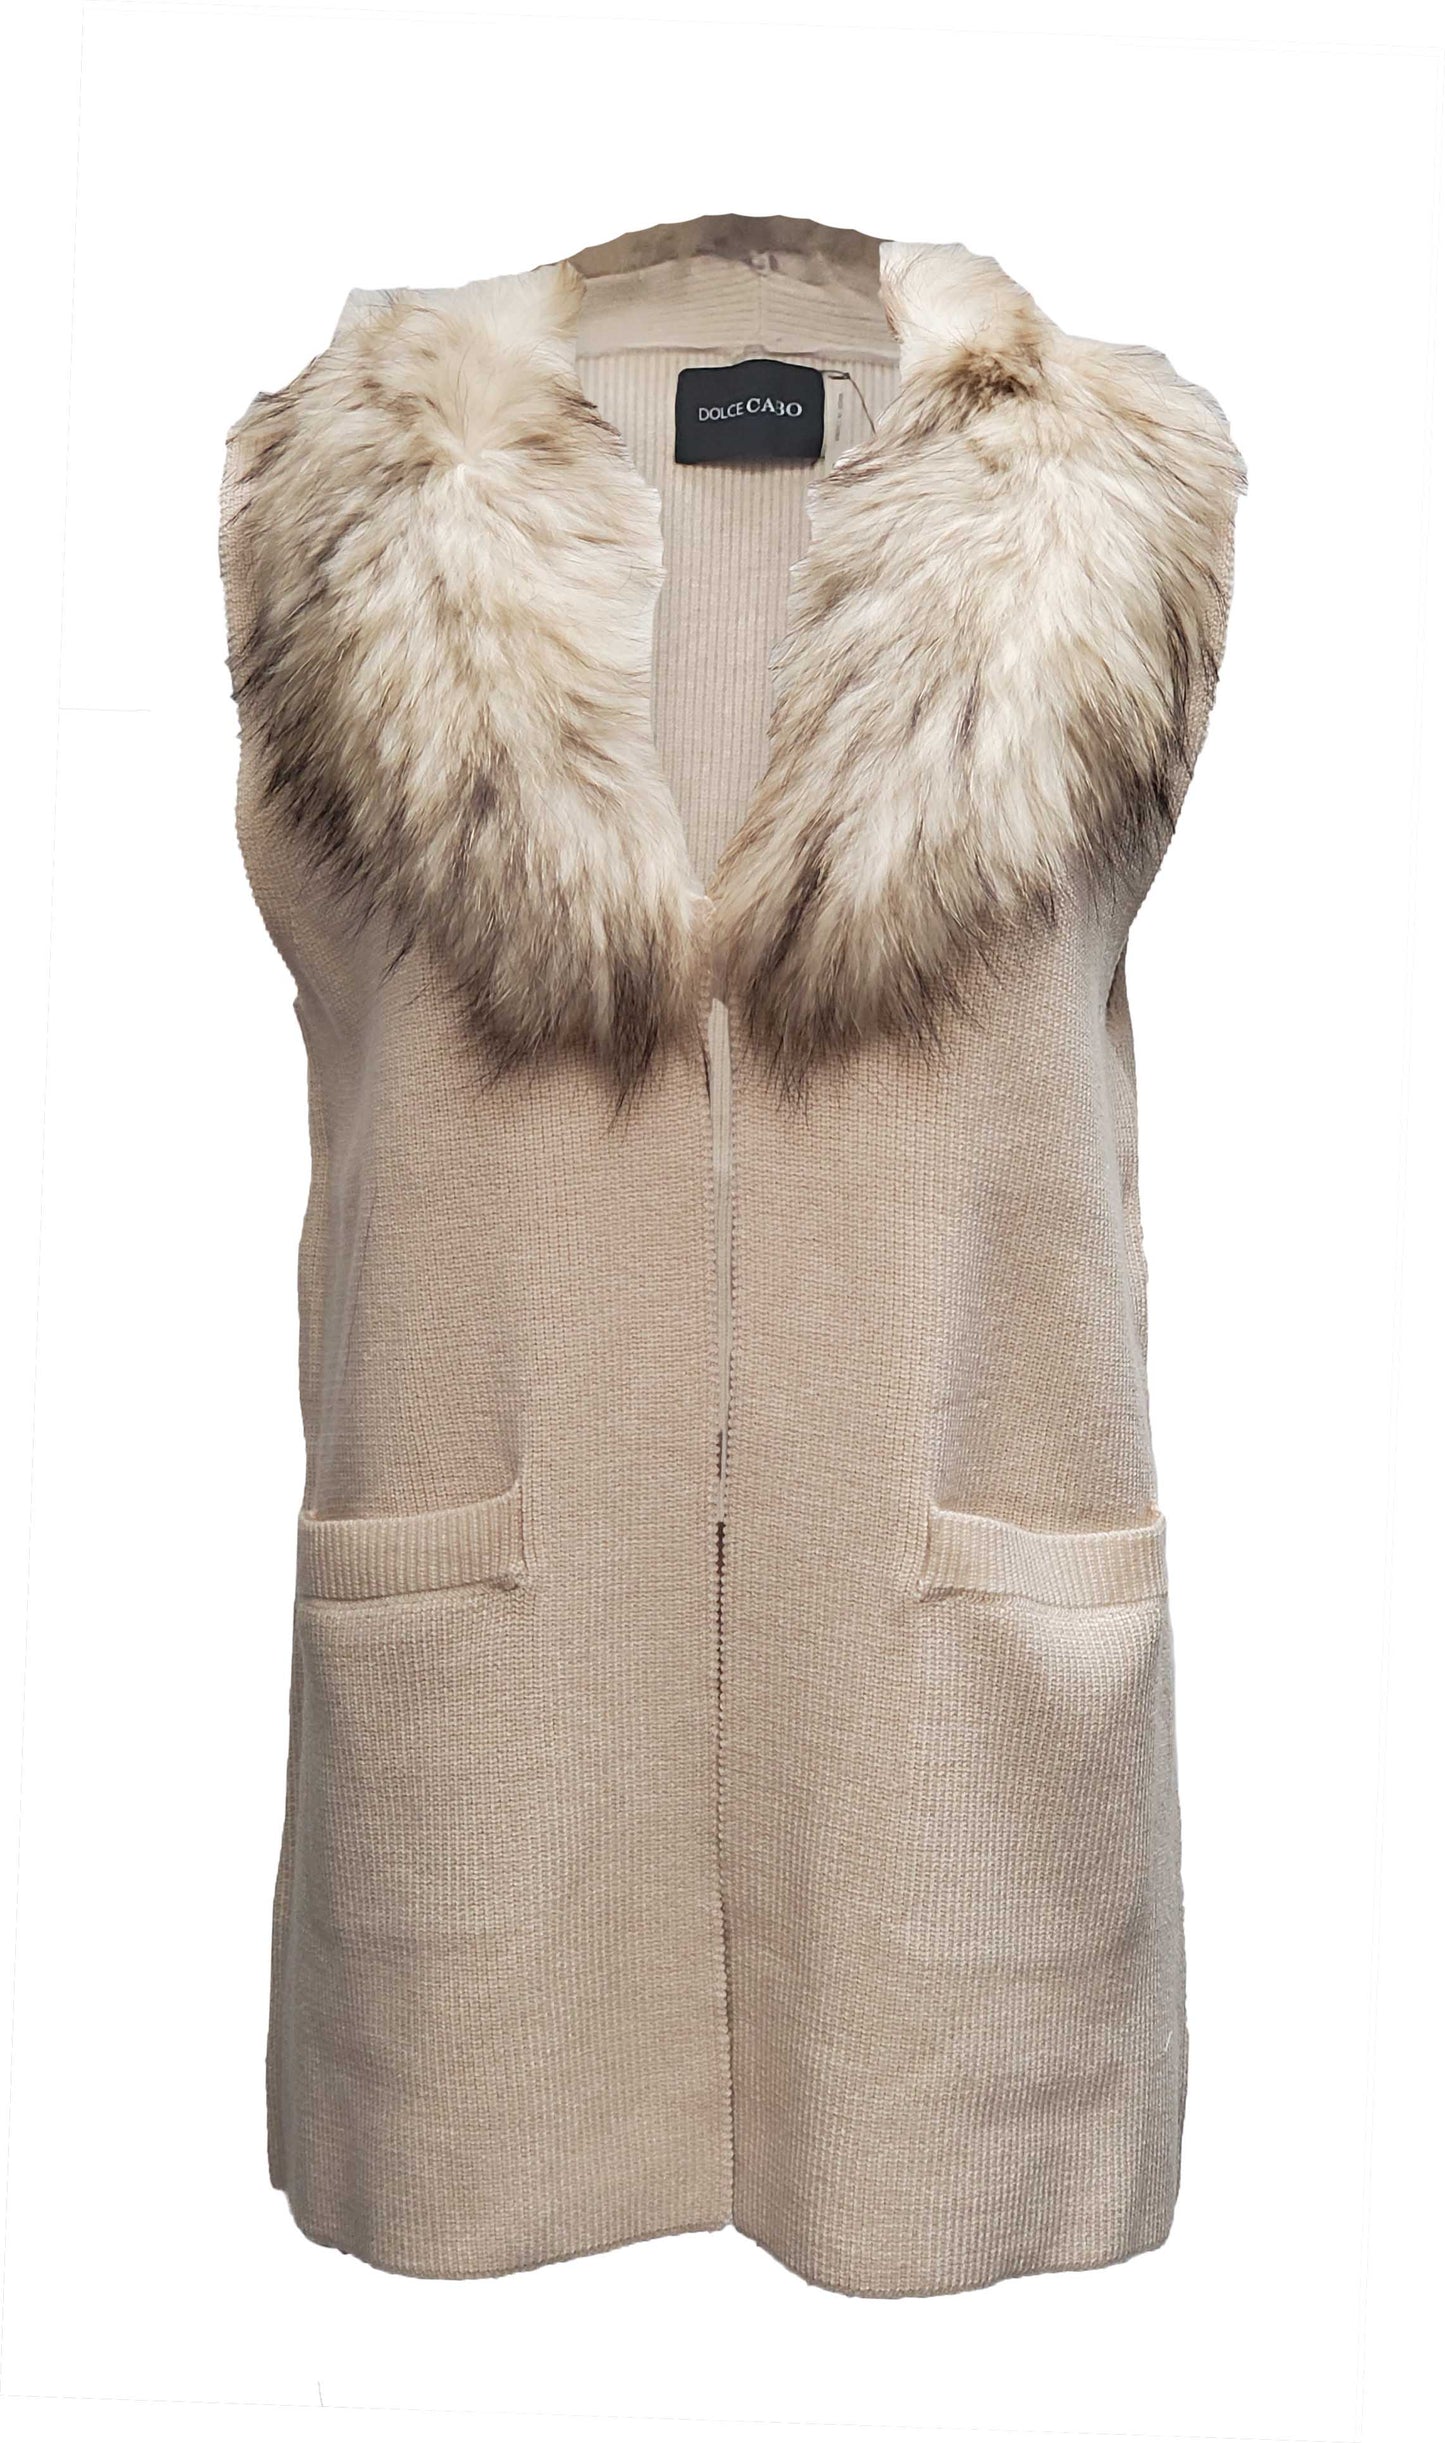 Knit Vest with Fur Collar